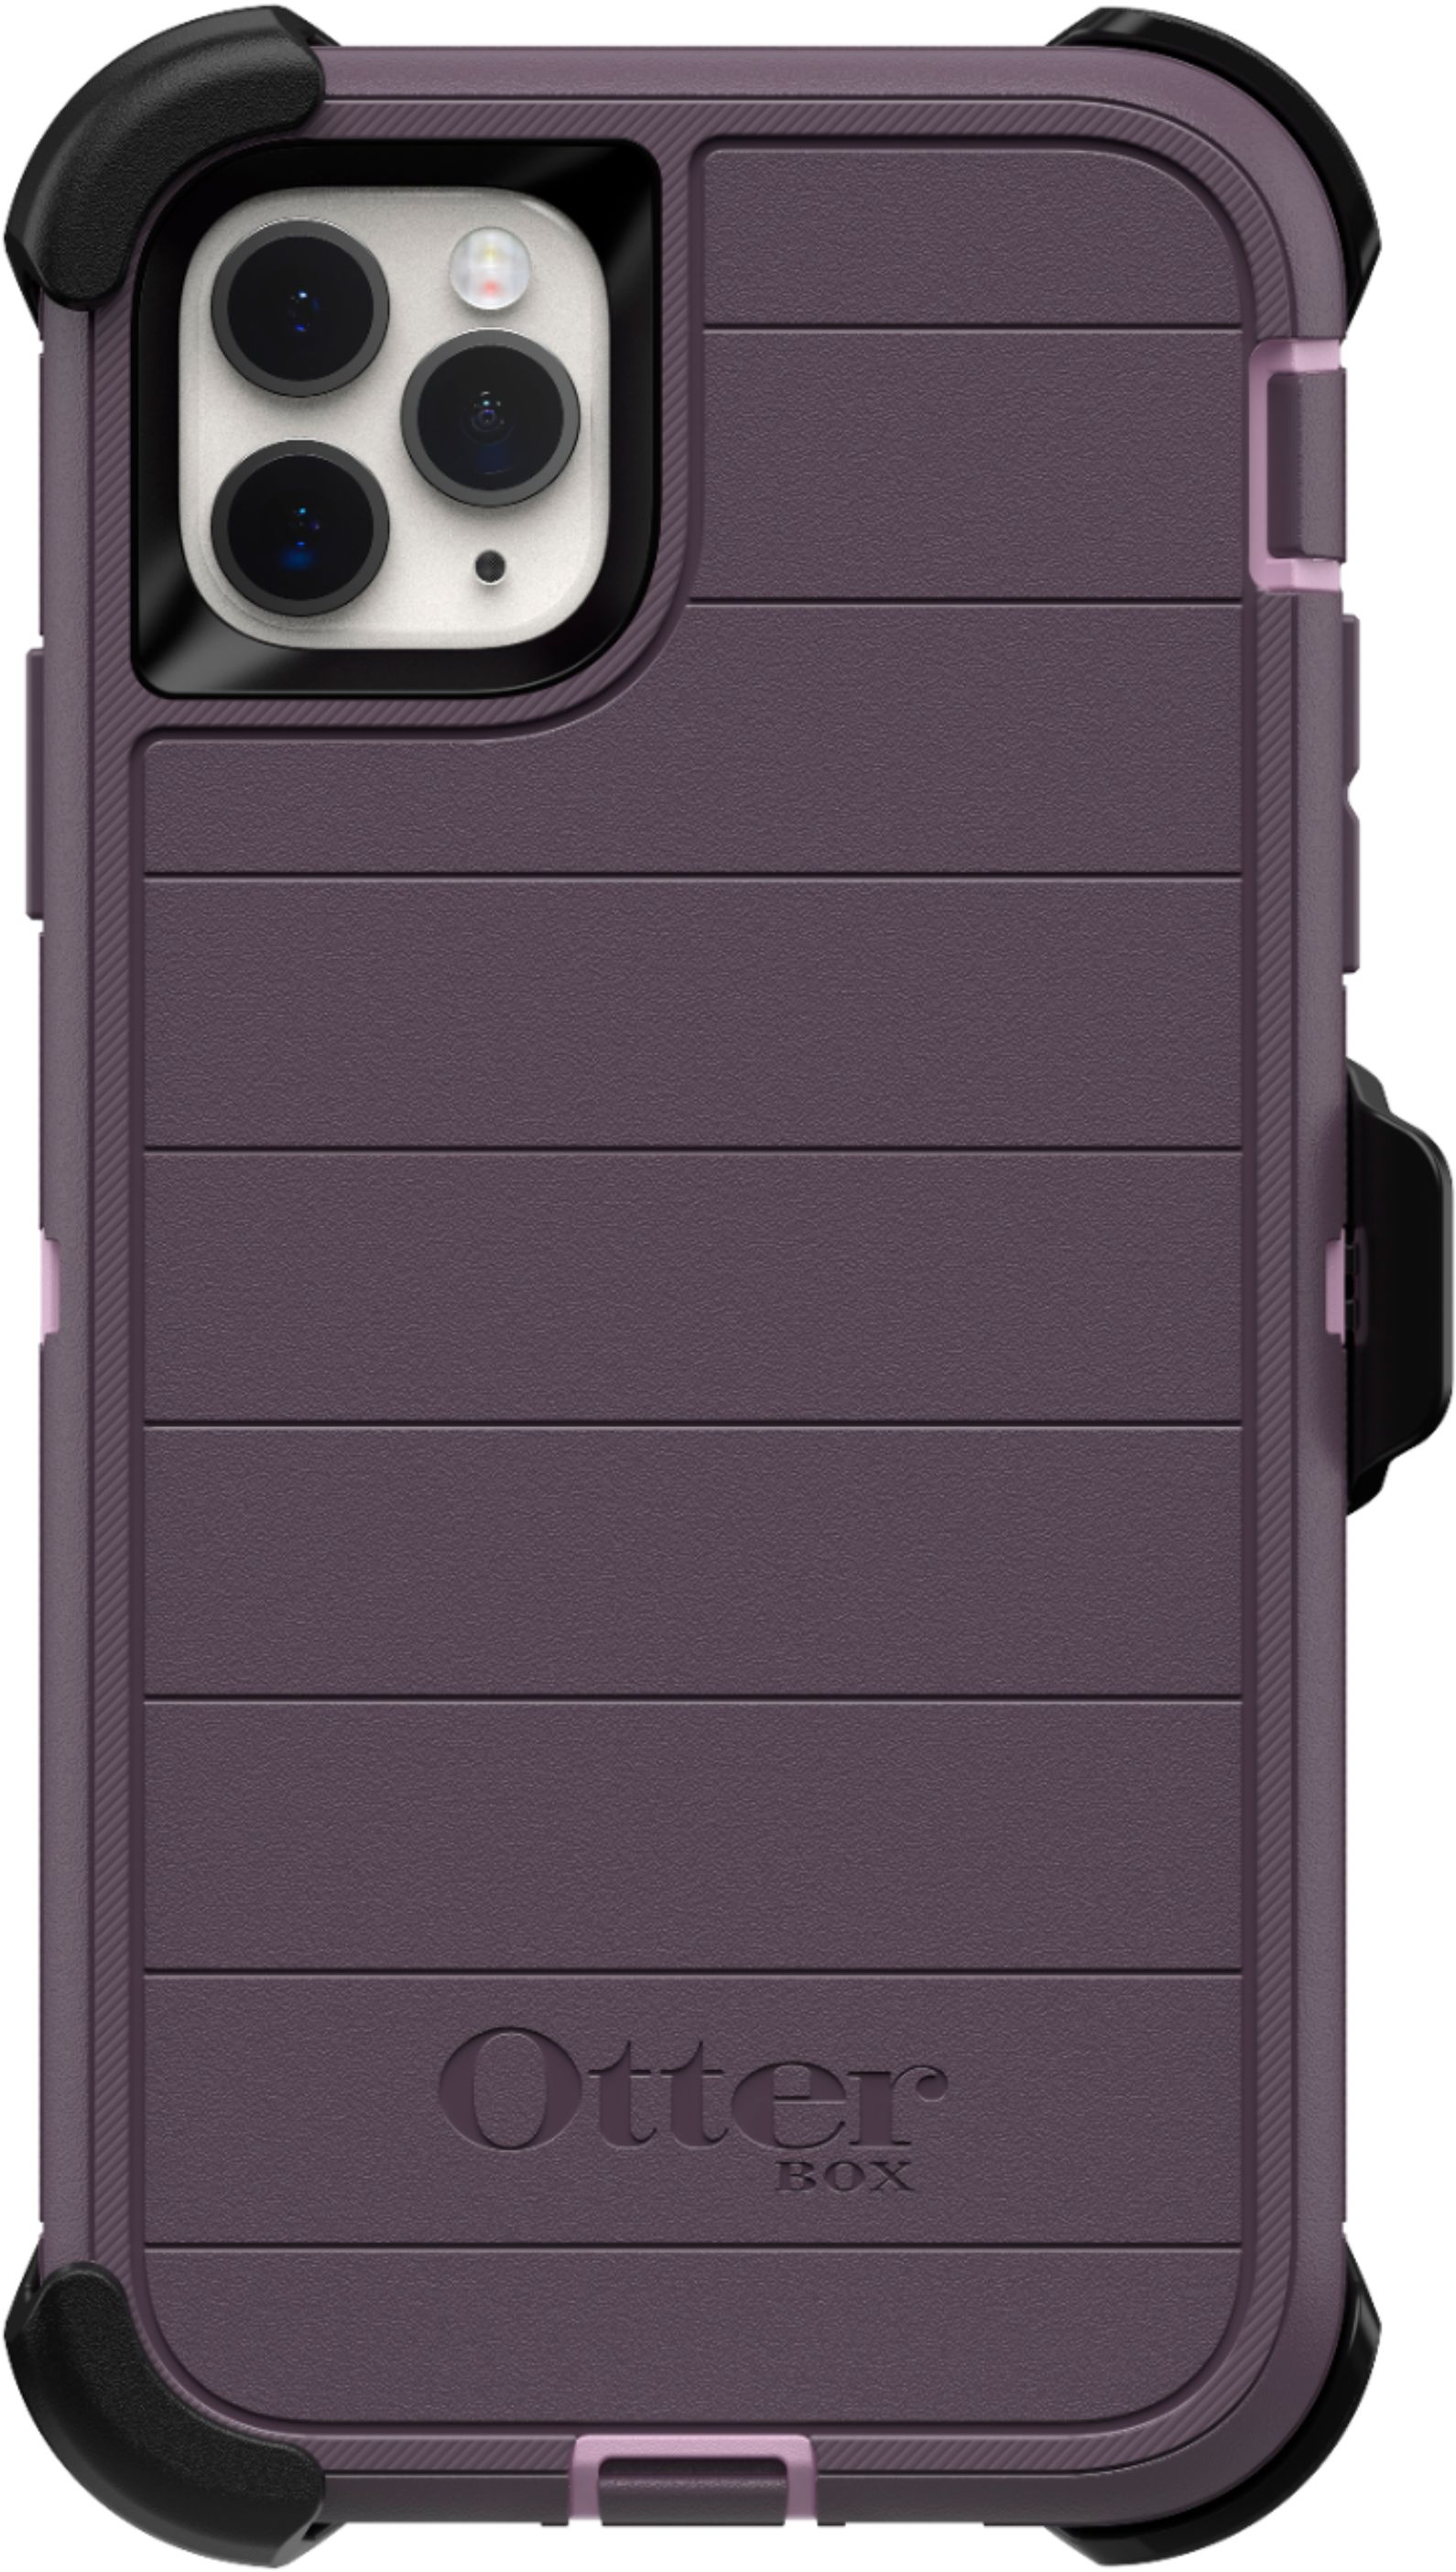 Otterbox Defender Pro Series Case For Apple Iphone 11 Pro Max Purple 77 Best Buy